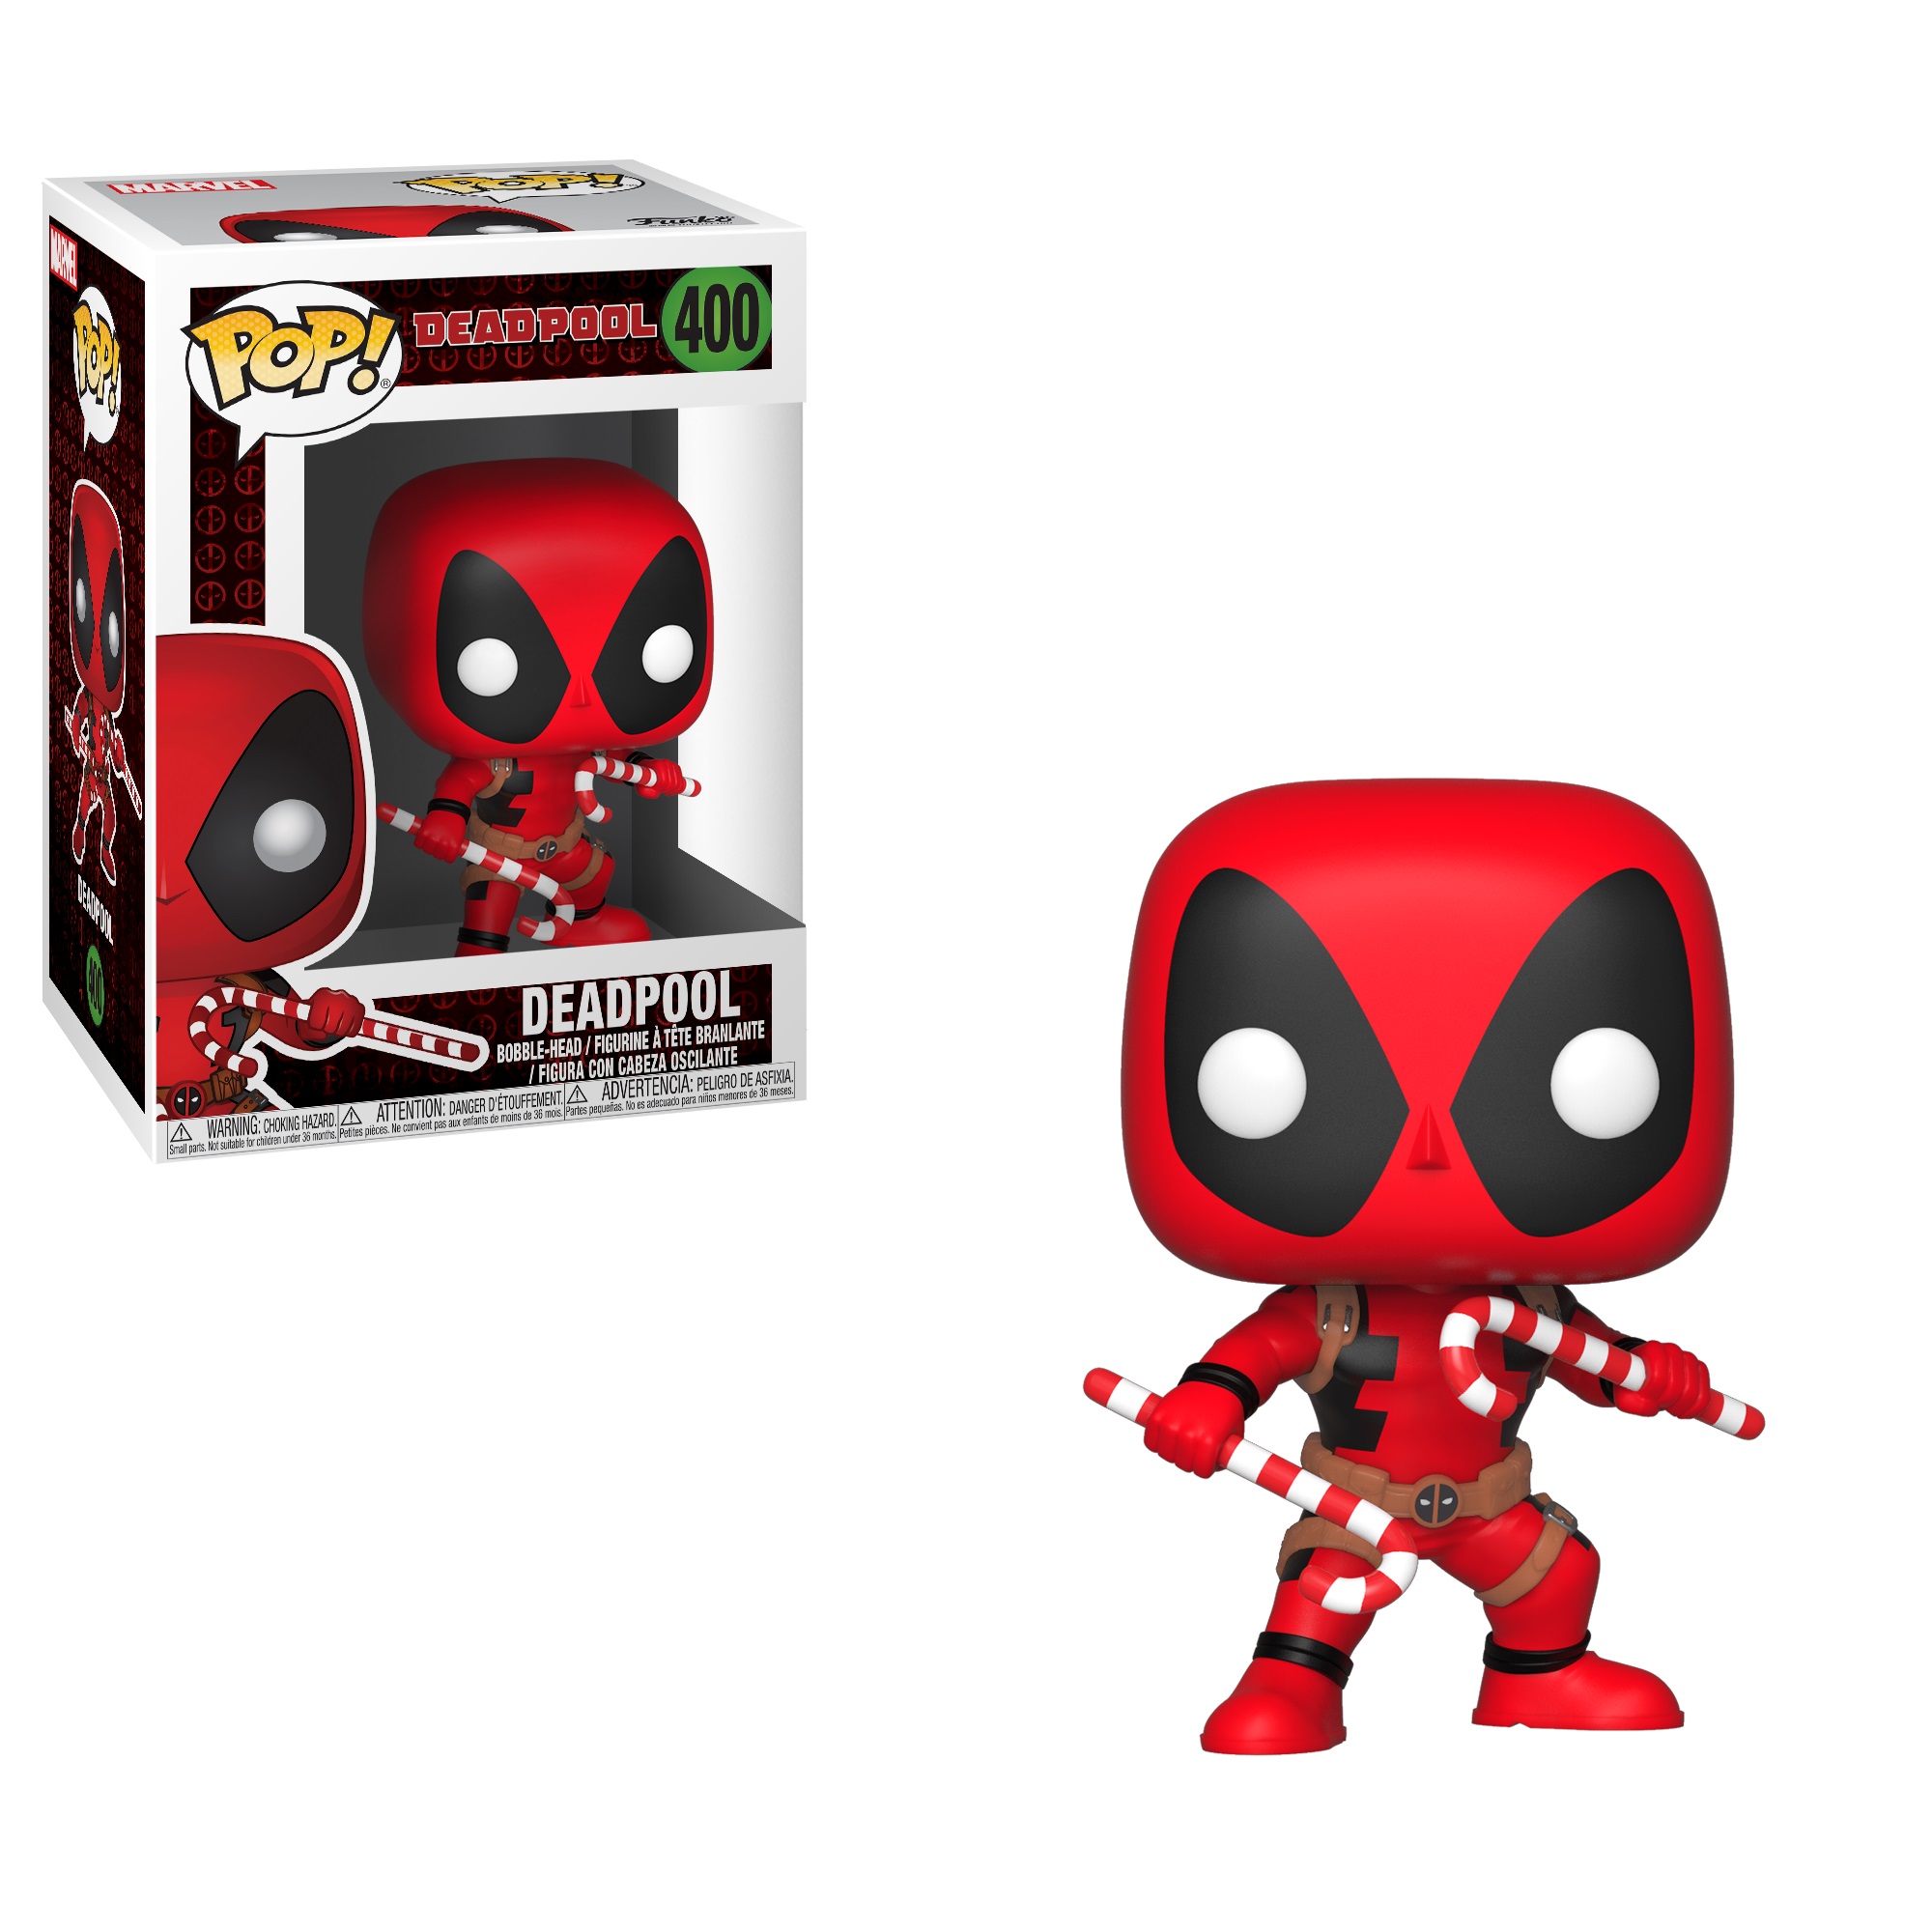 Marvel Holiday Funko Pop! Now Available to PreOrder